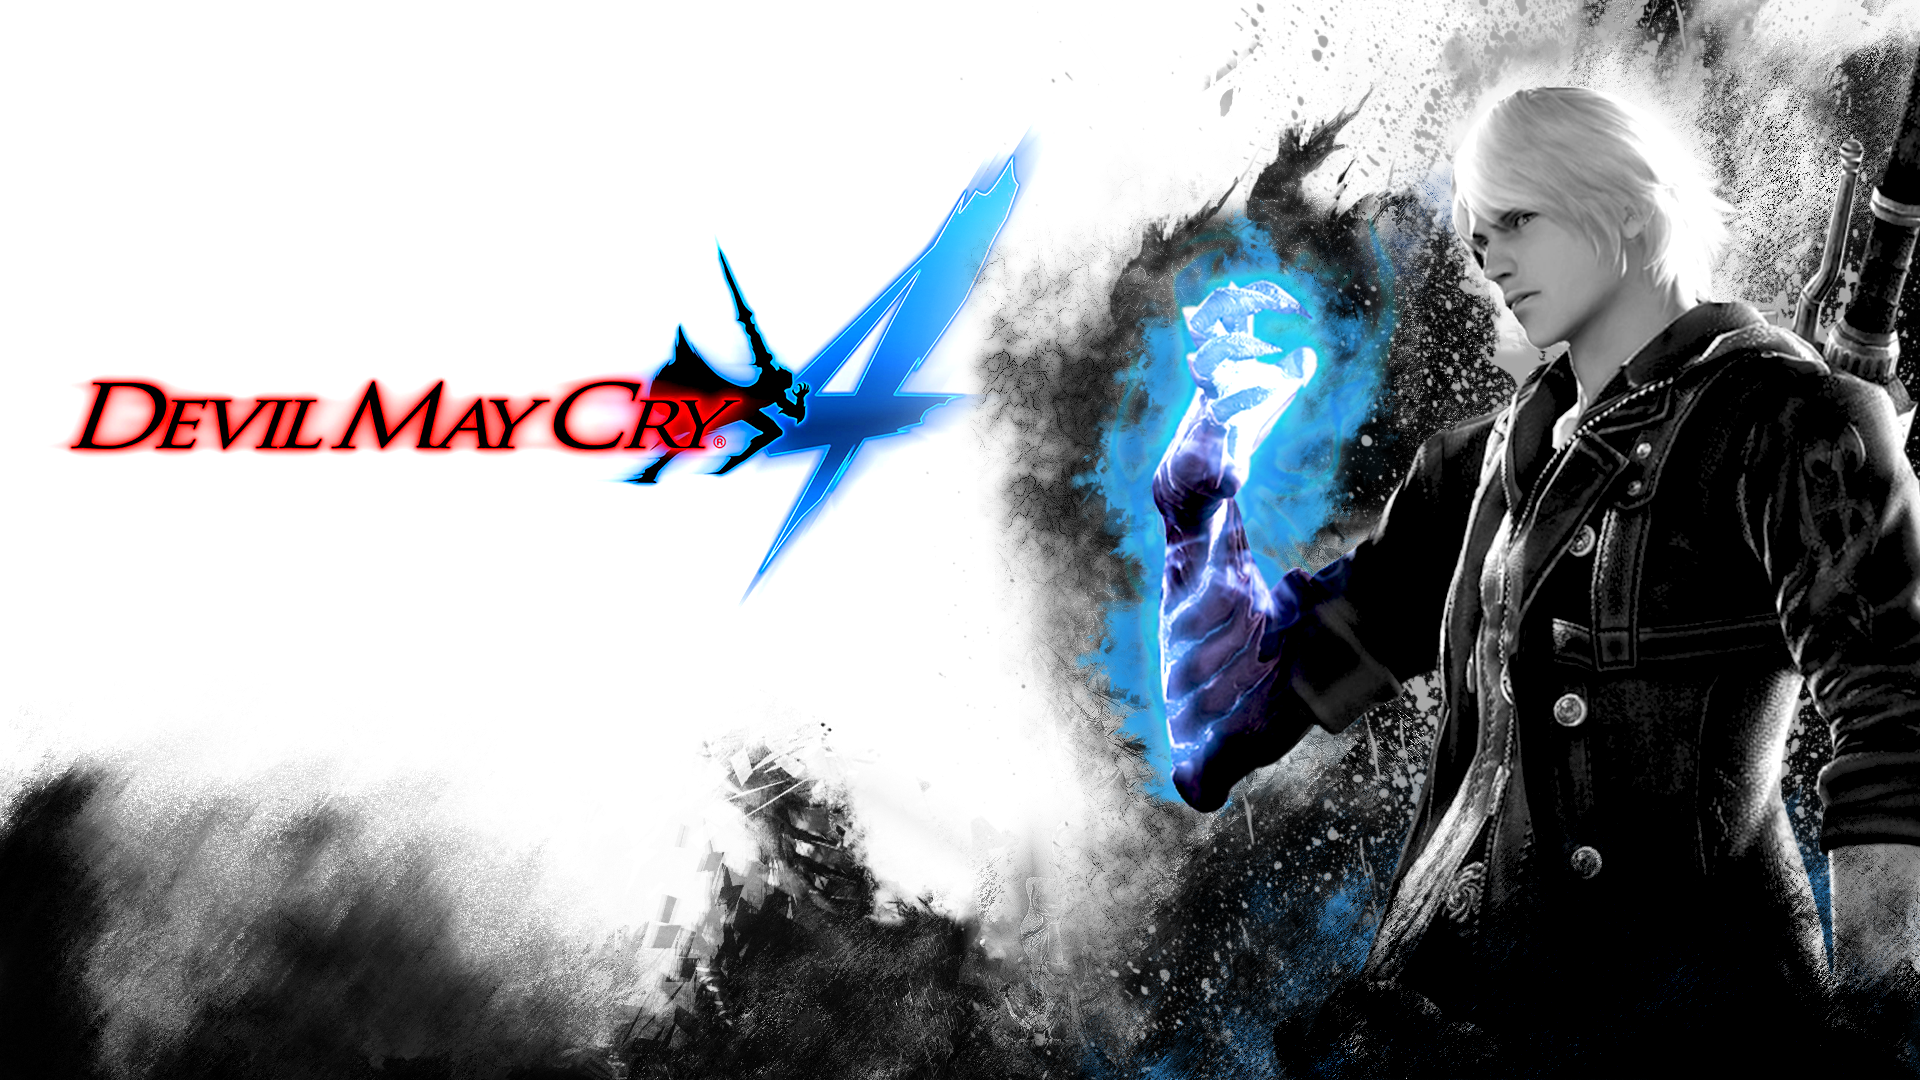 BROWSE devil may cry 4 screenshots  HD Photo Wallpaper Collection HD